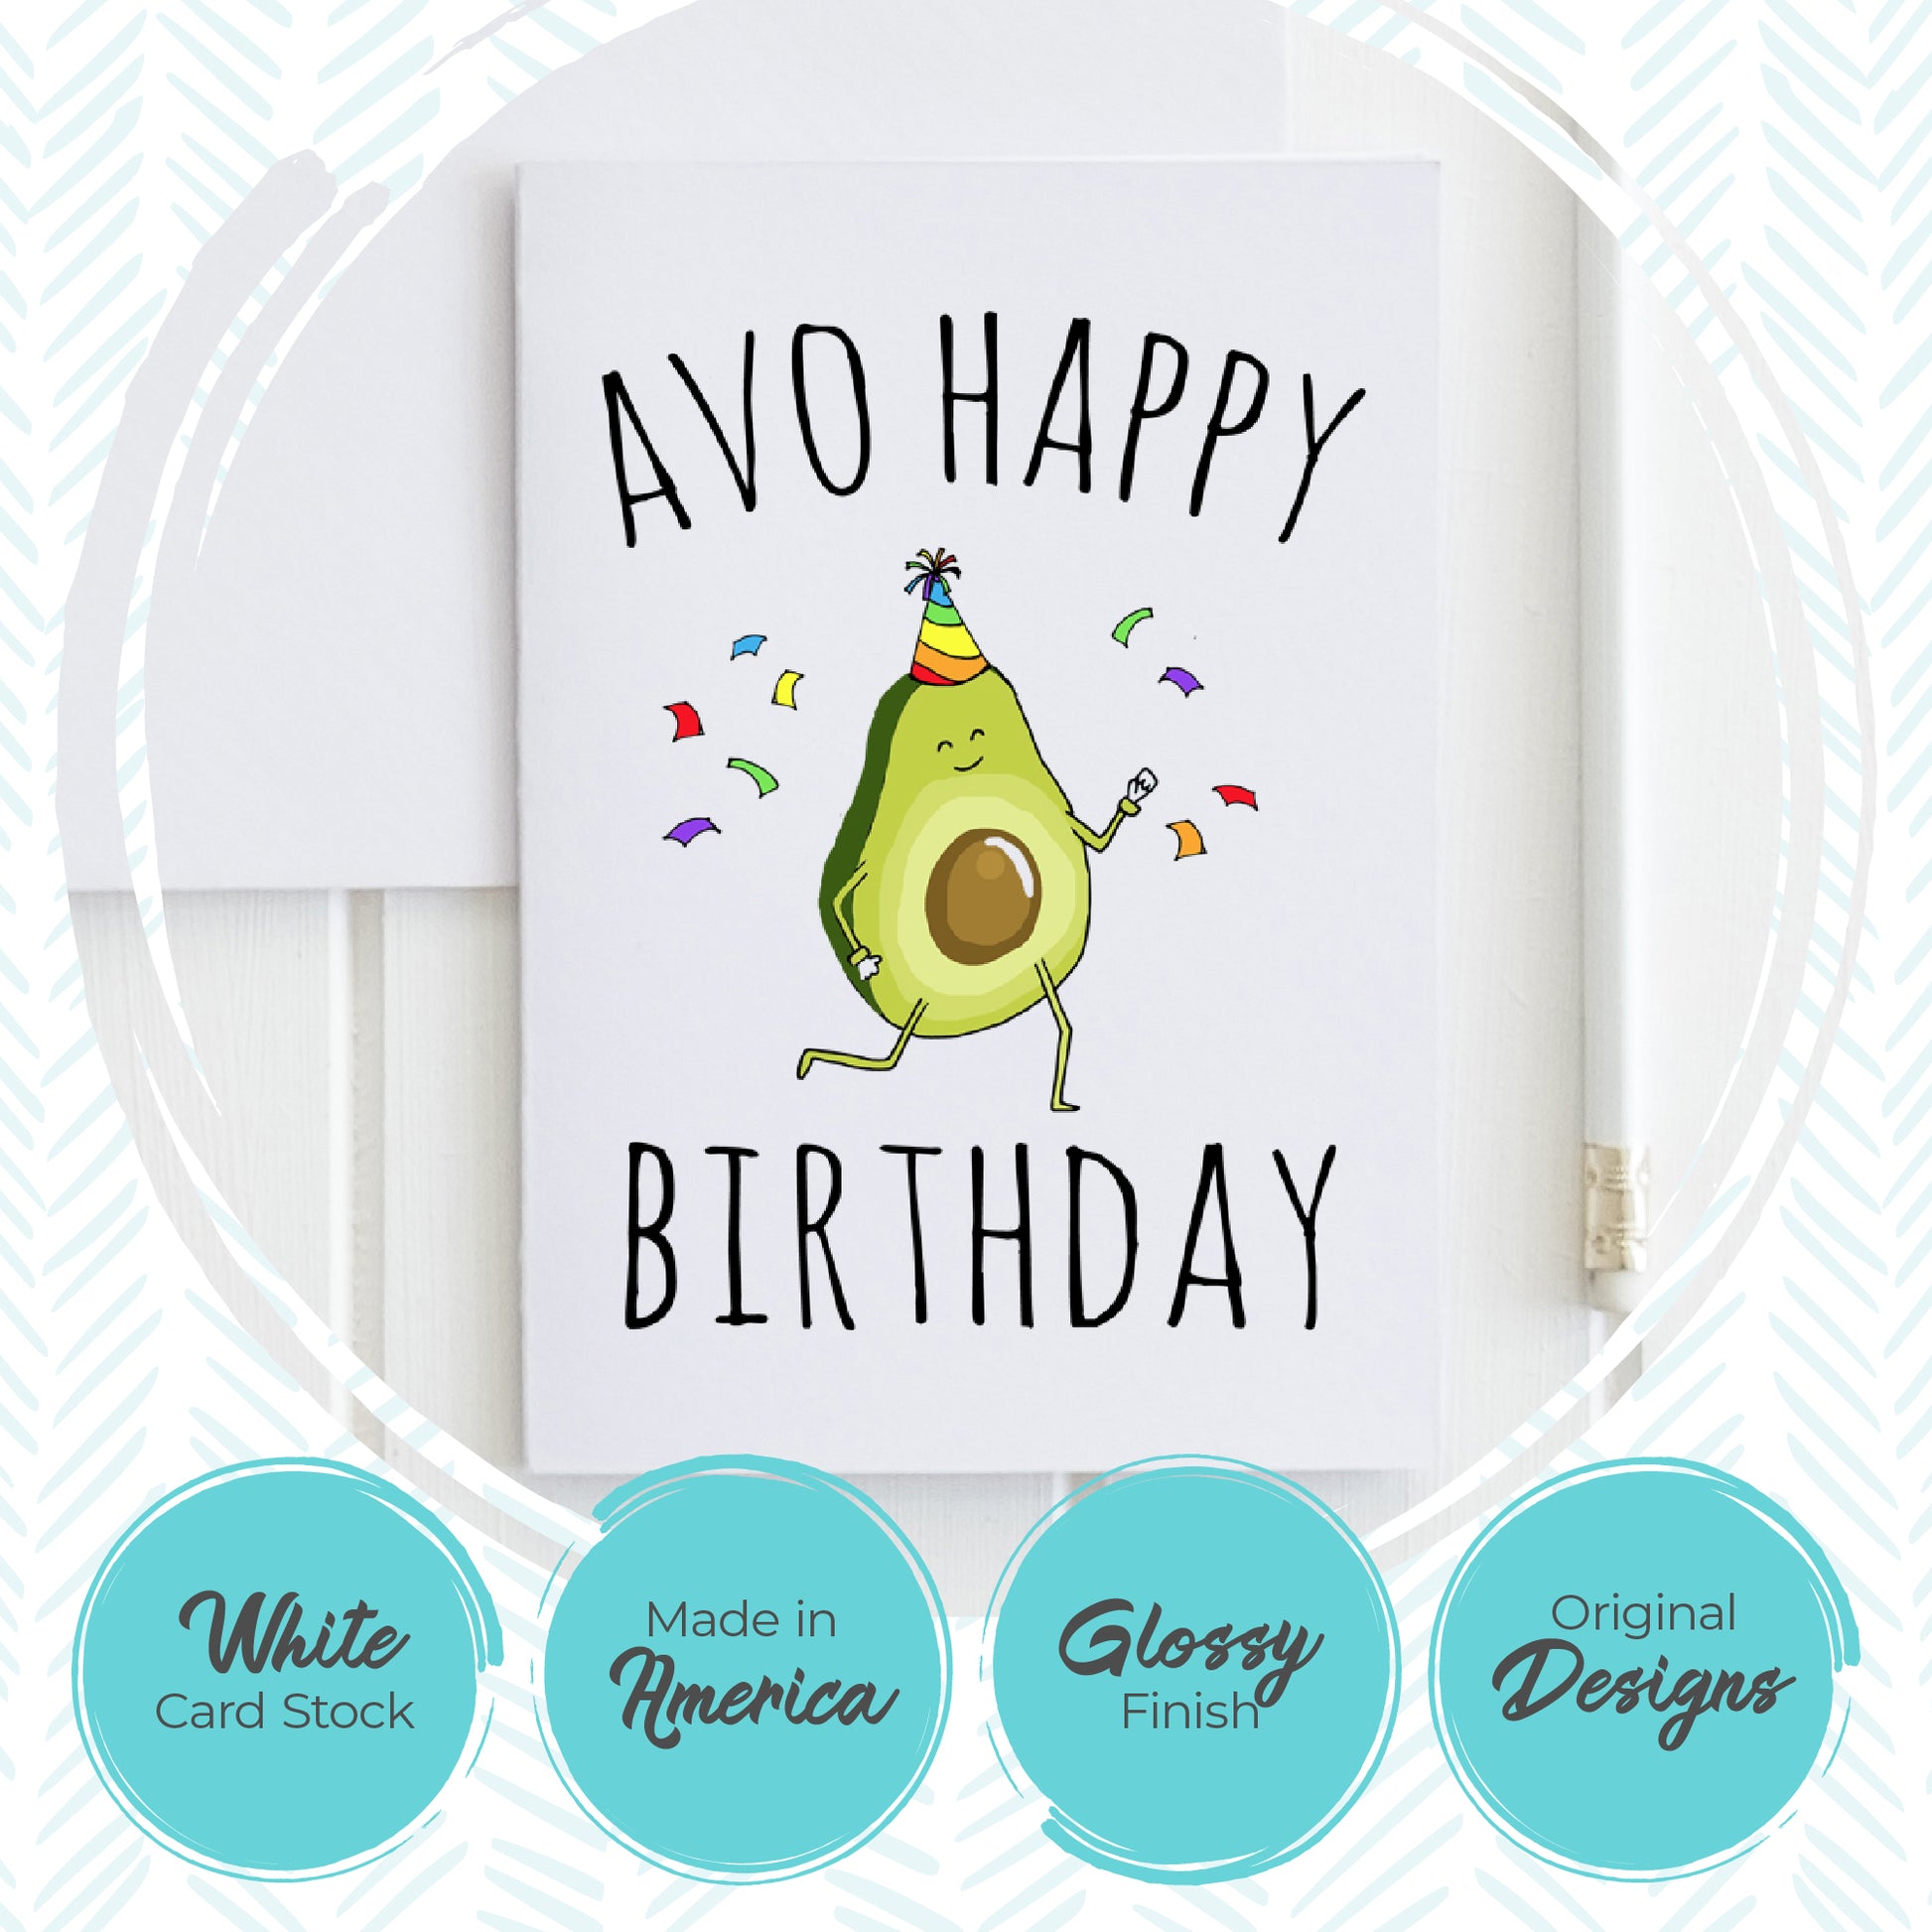 Oh Snap! - Holiday Greeting Card - MoonlightMakers